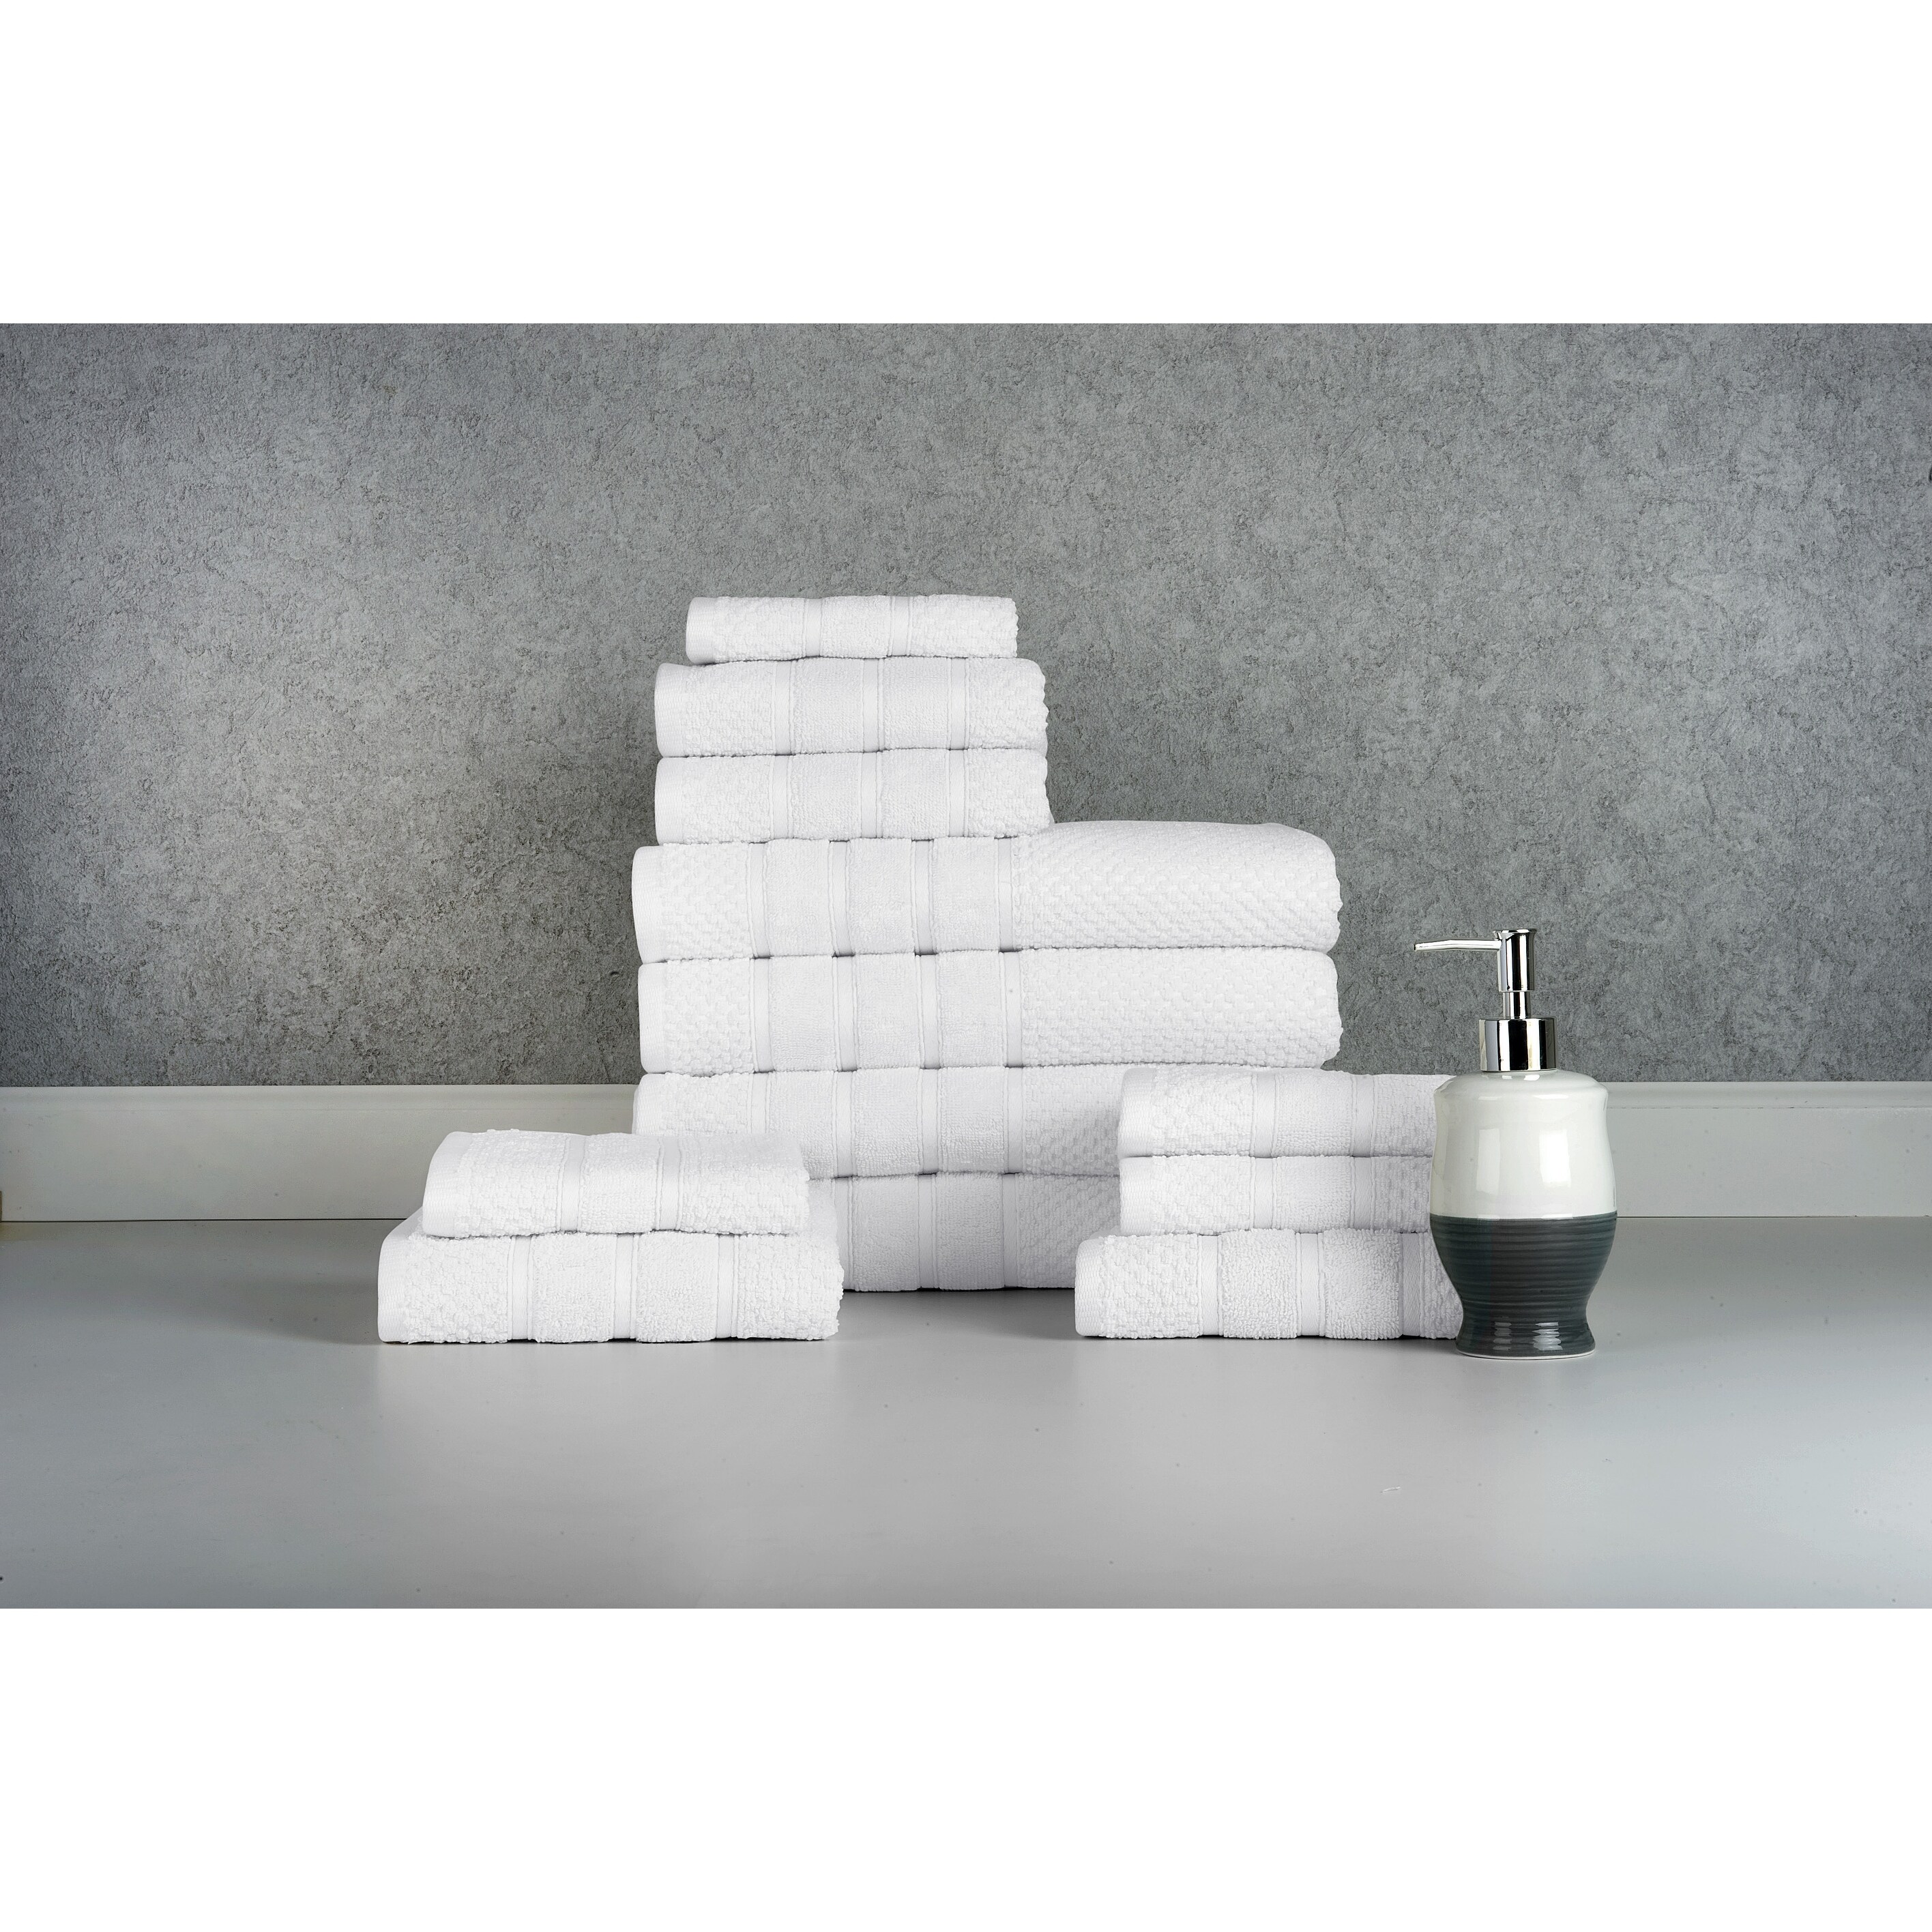 https://ak1.ostkcdn.com/images/products/is/images/direct/a7818986b780450f8dd0ce3d9d10d1a22c327d59/Bibb-Home-12-Piece-Egyptian-Cotton-Towel-Set.jpg